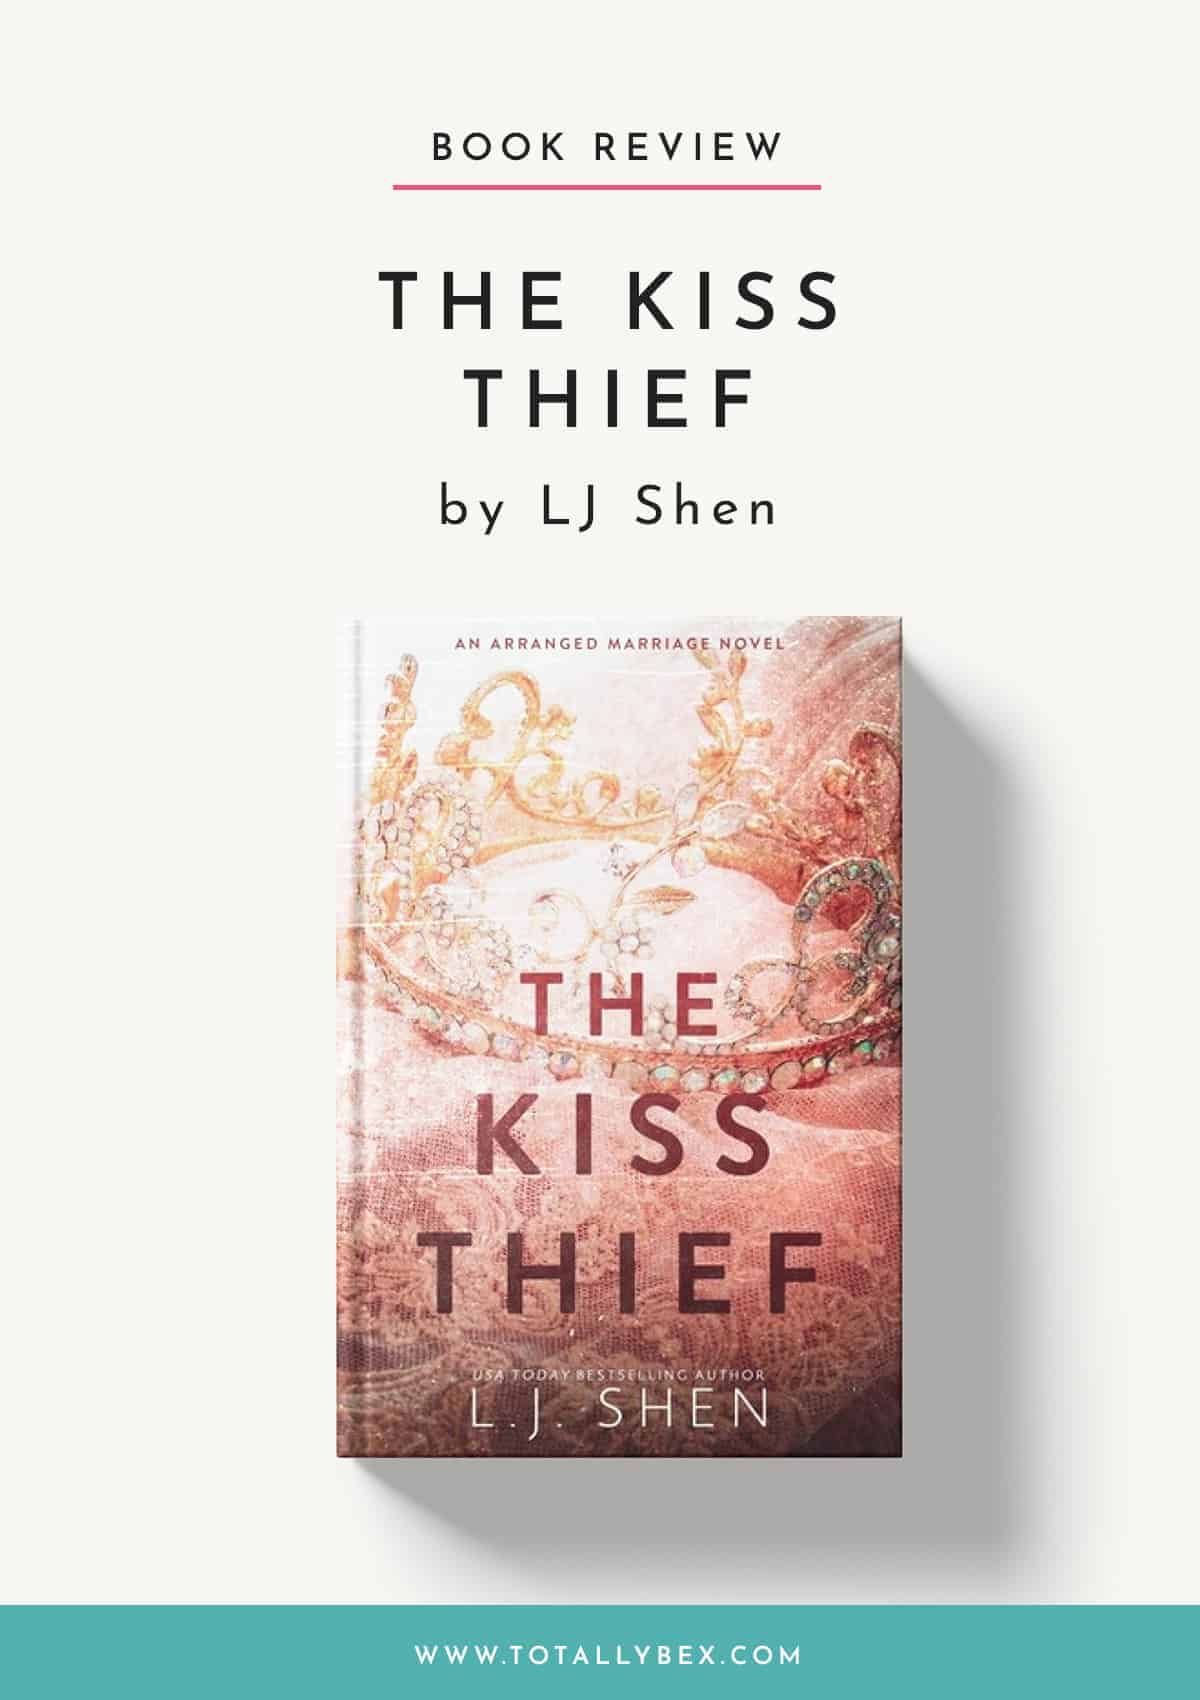 The Kiss Thief by LJ Shen-Book Review